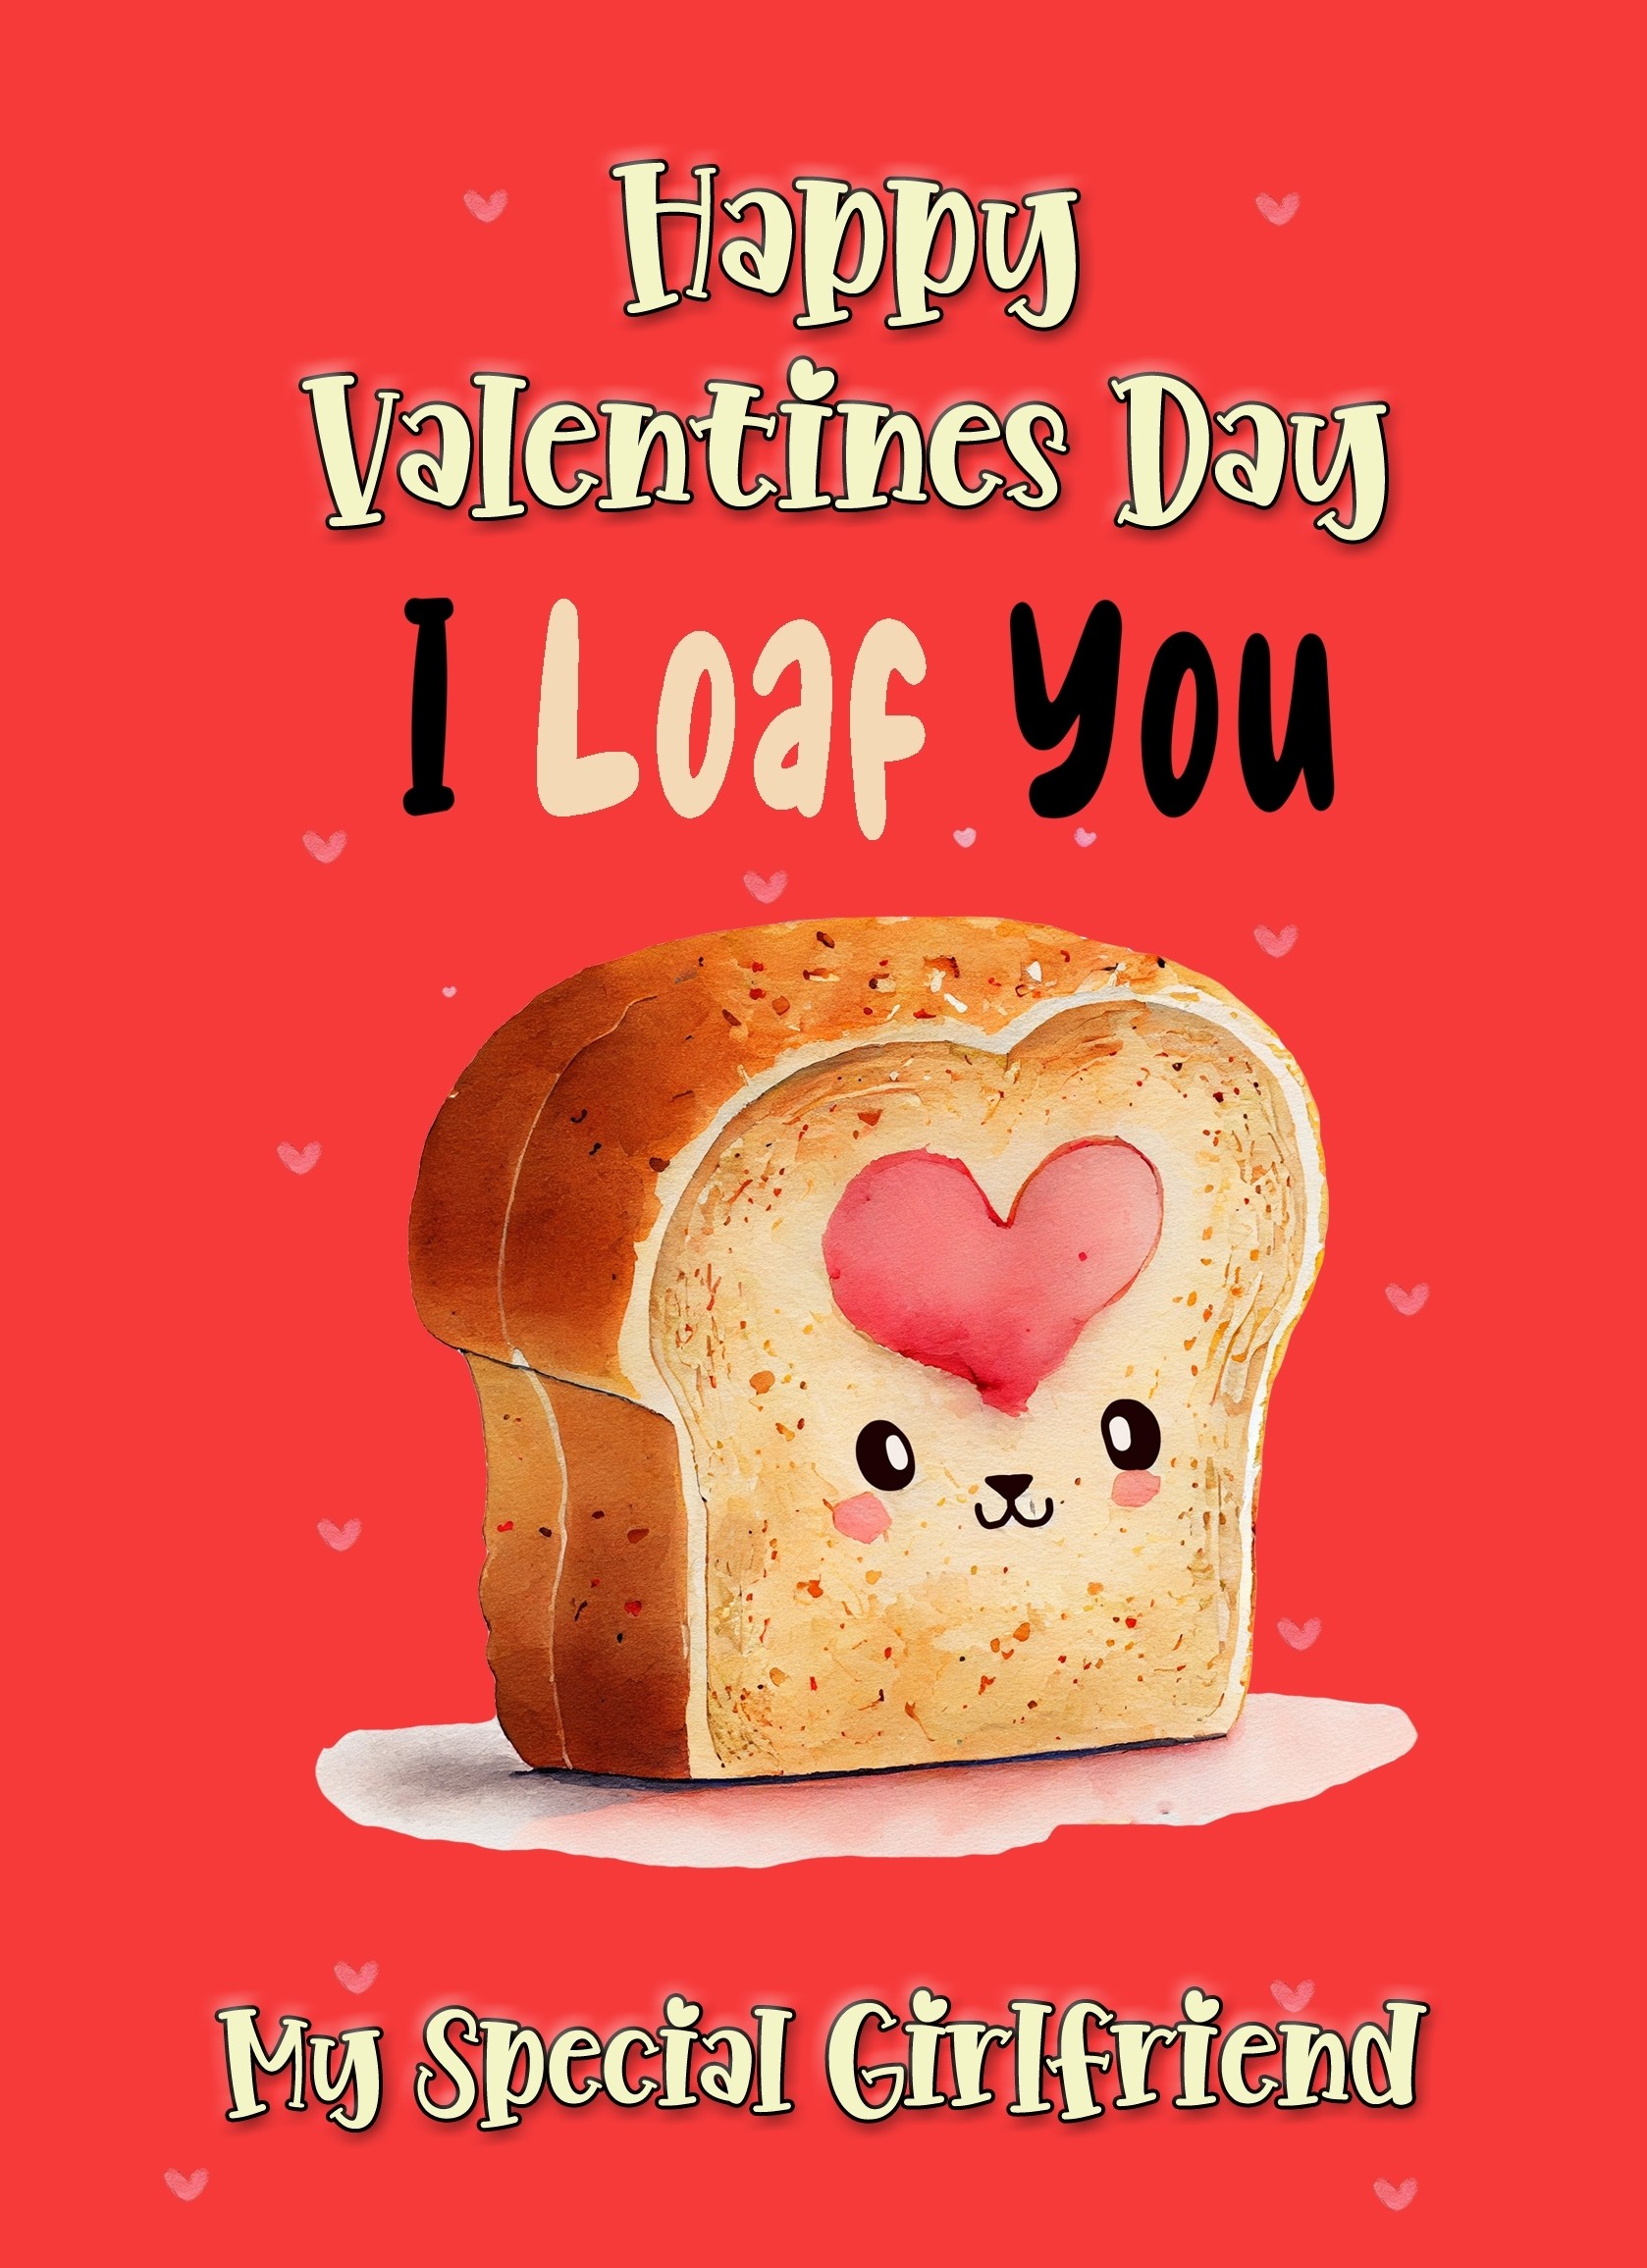 Funny Pun Valentines Day Card for Girlfriend (Loaf You)